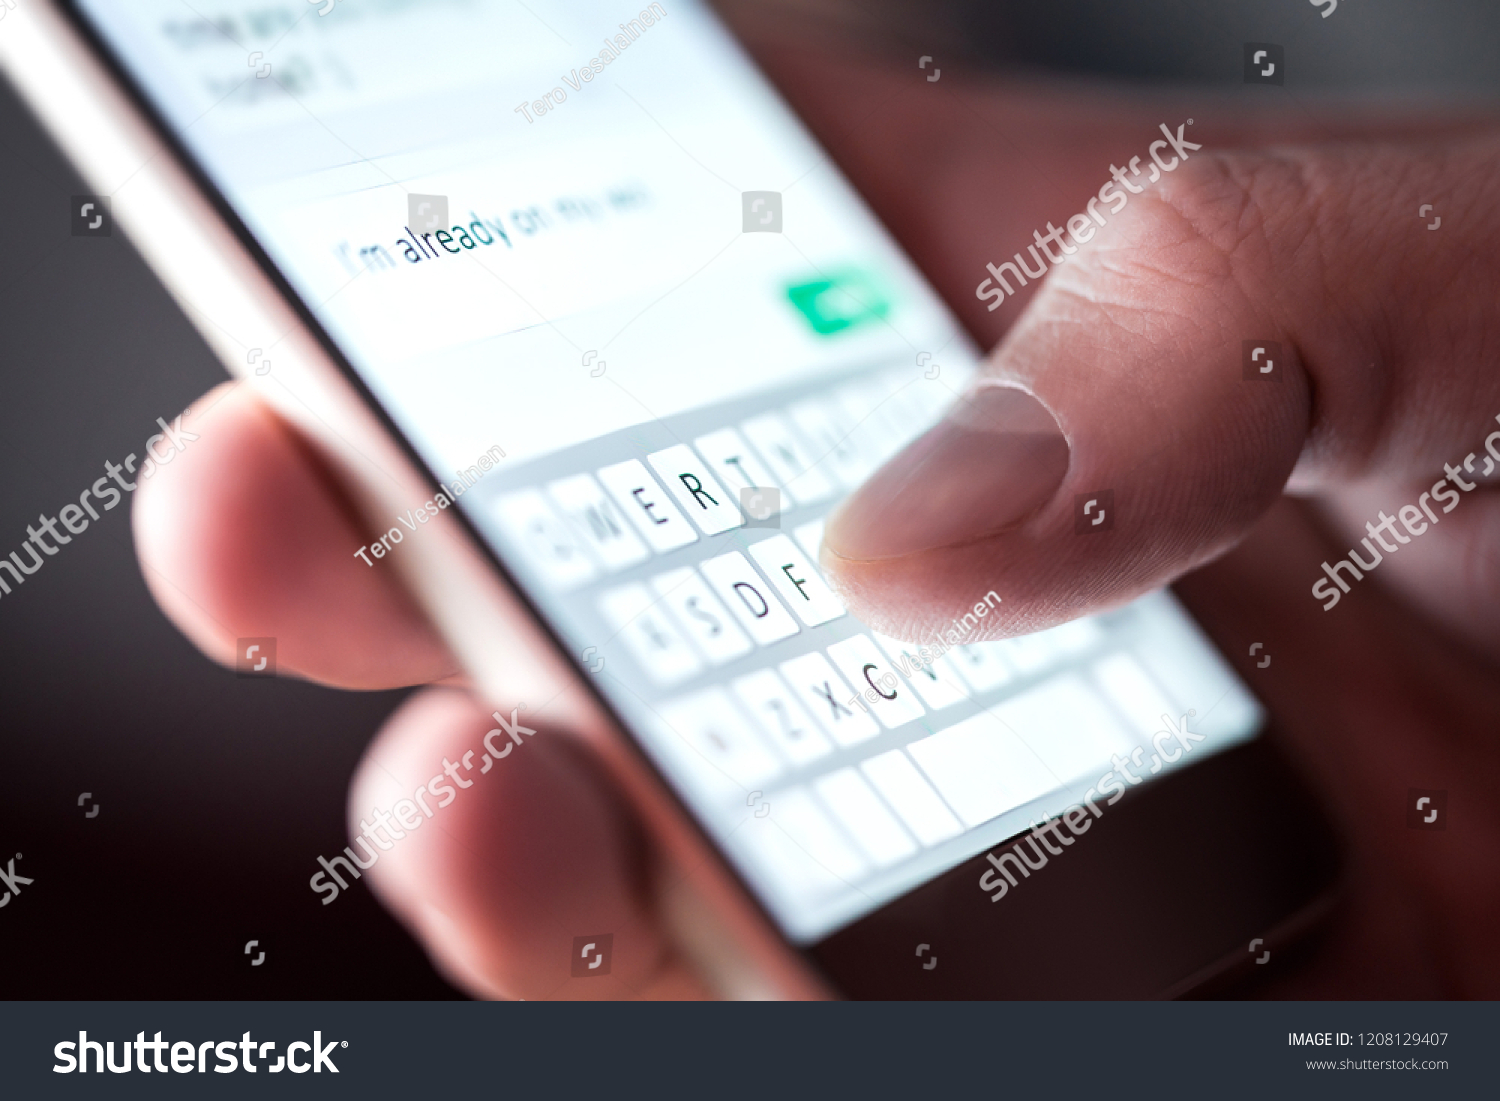 Man sending text message and sms with smartphone. Guy texting and using mobile phone late at night in dark. Communication or sexting concept. Finger typing with cellphone keyboard. Light from screen. #1208129407